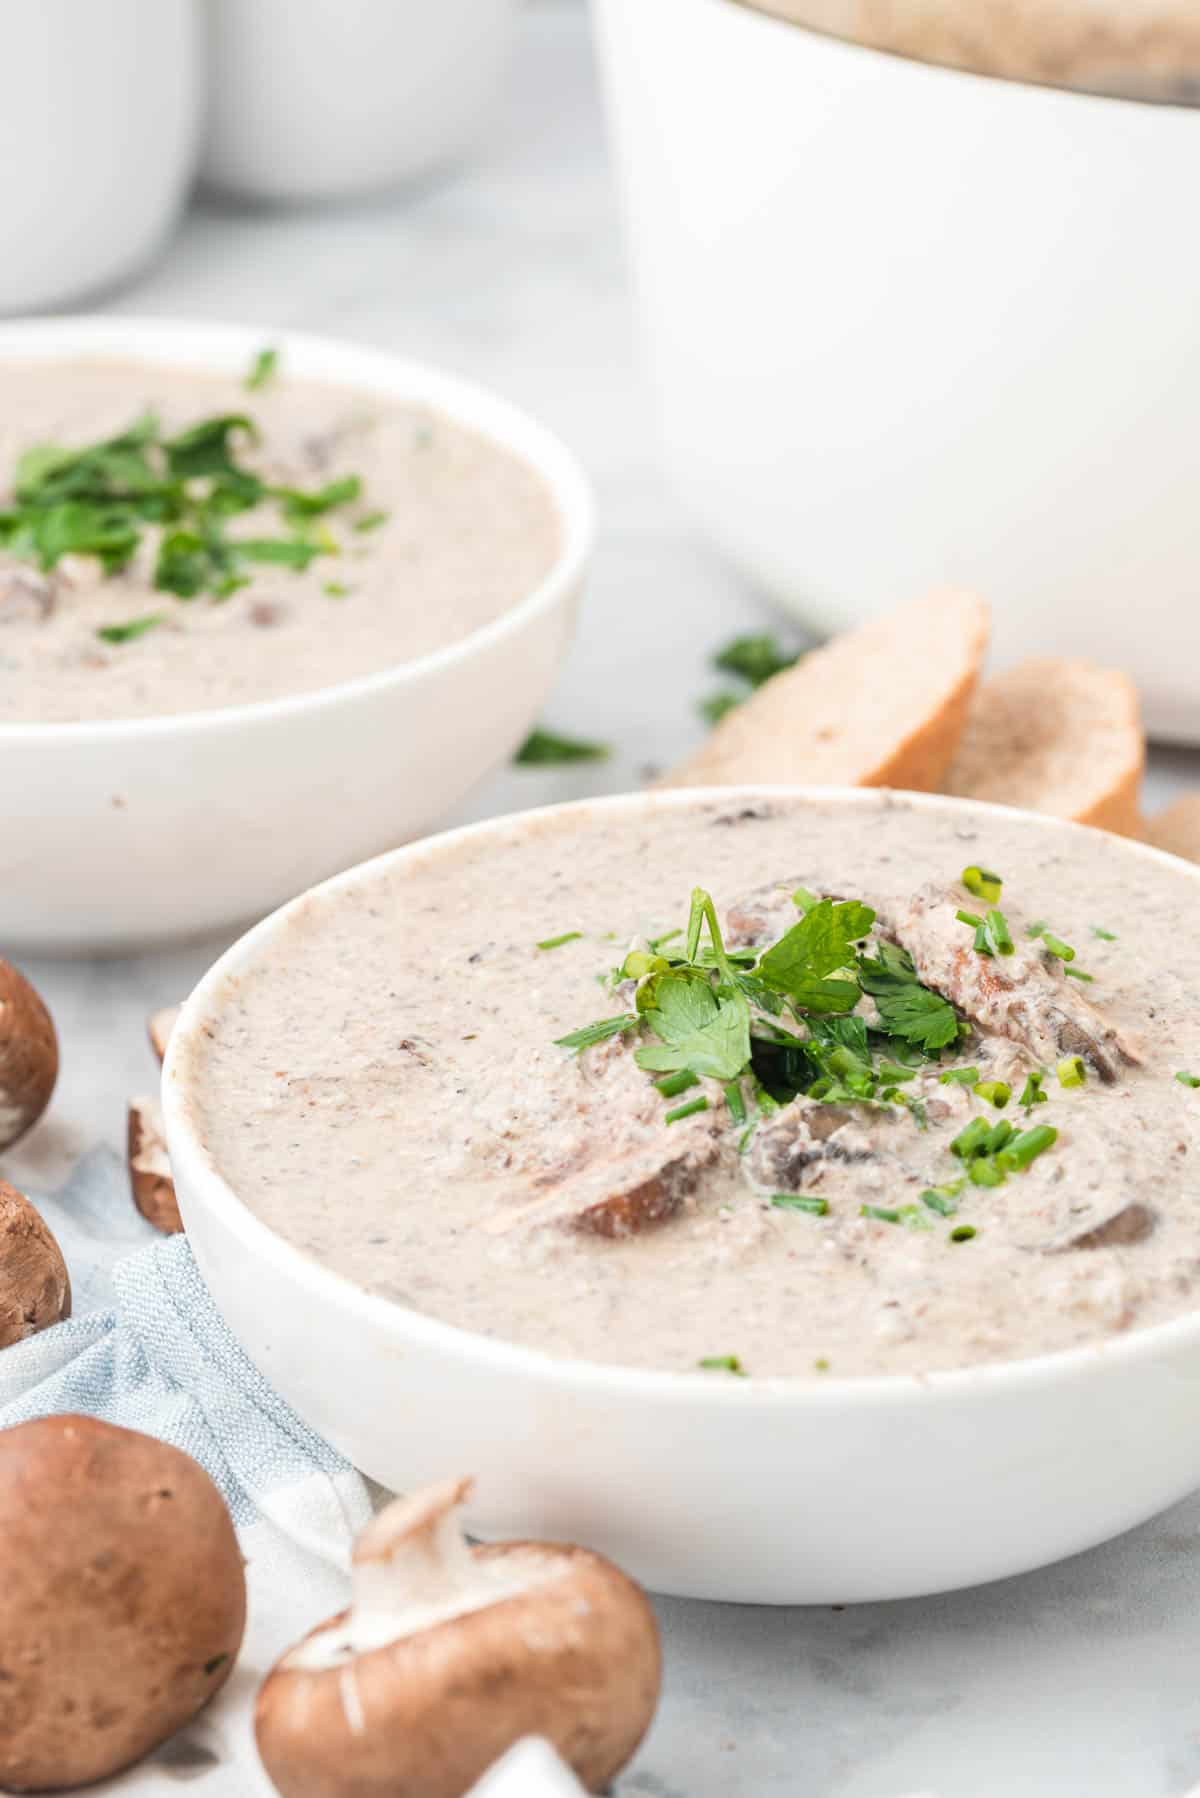 Bowls of cream of mushroom soup garnished with fresh parsley, next to slices of crusty bread and mushrooms.